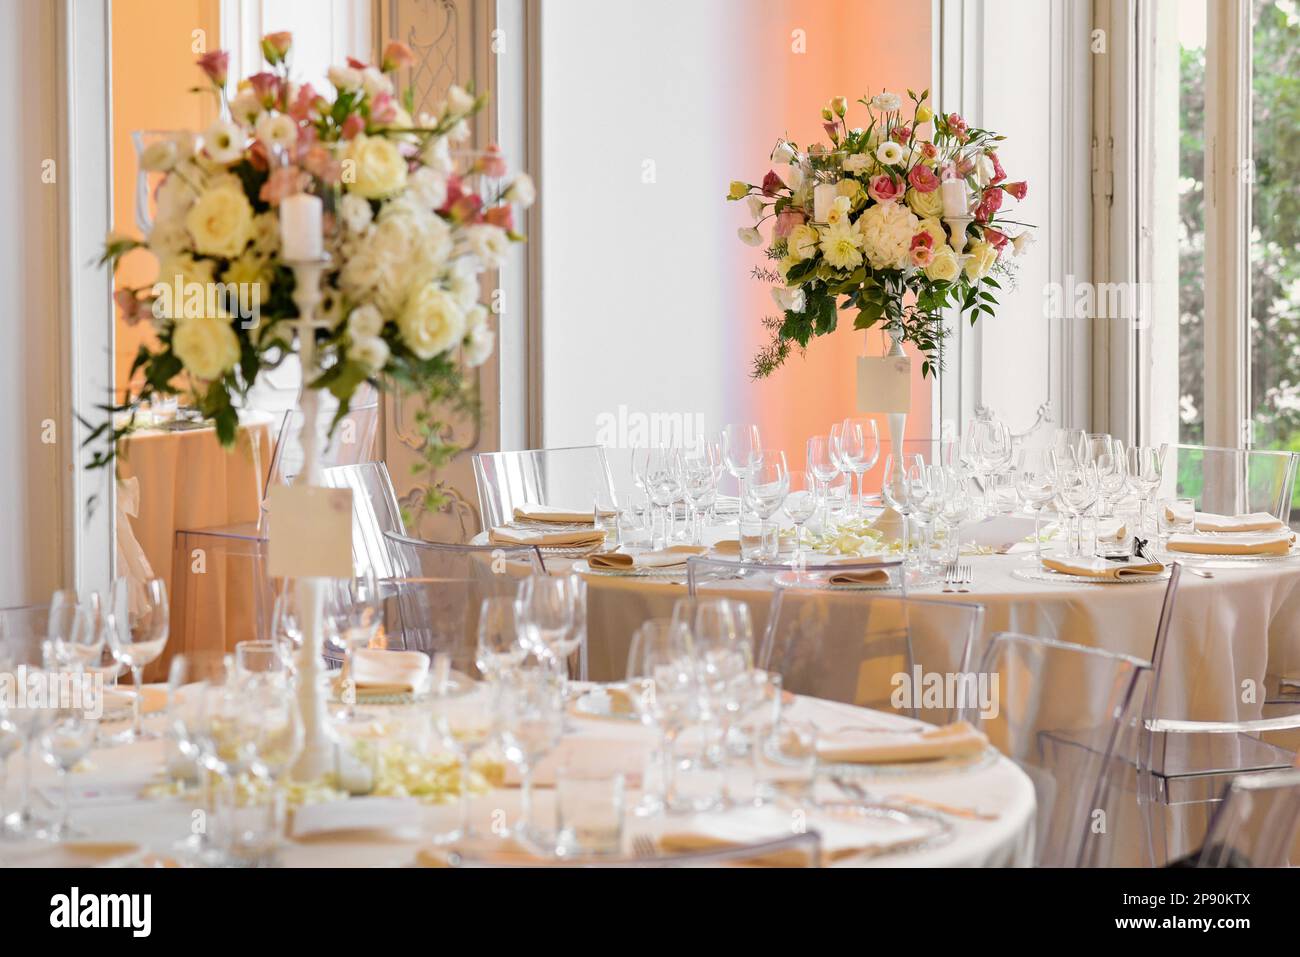 Elegant wedding banquet setting tables with glassware and blooming flowers in vases against window Stock Photo